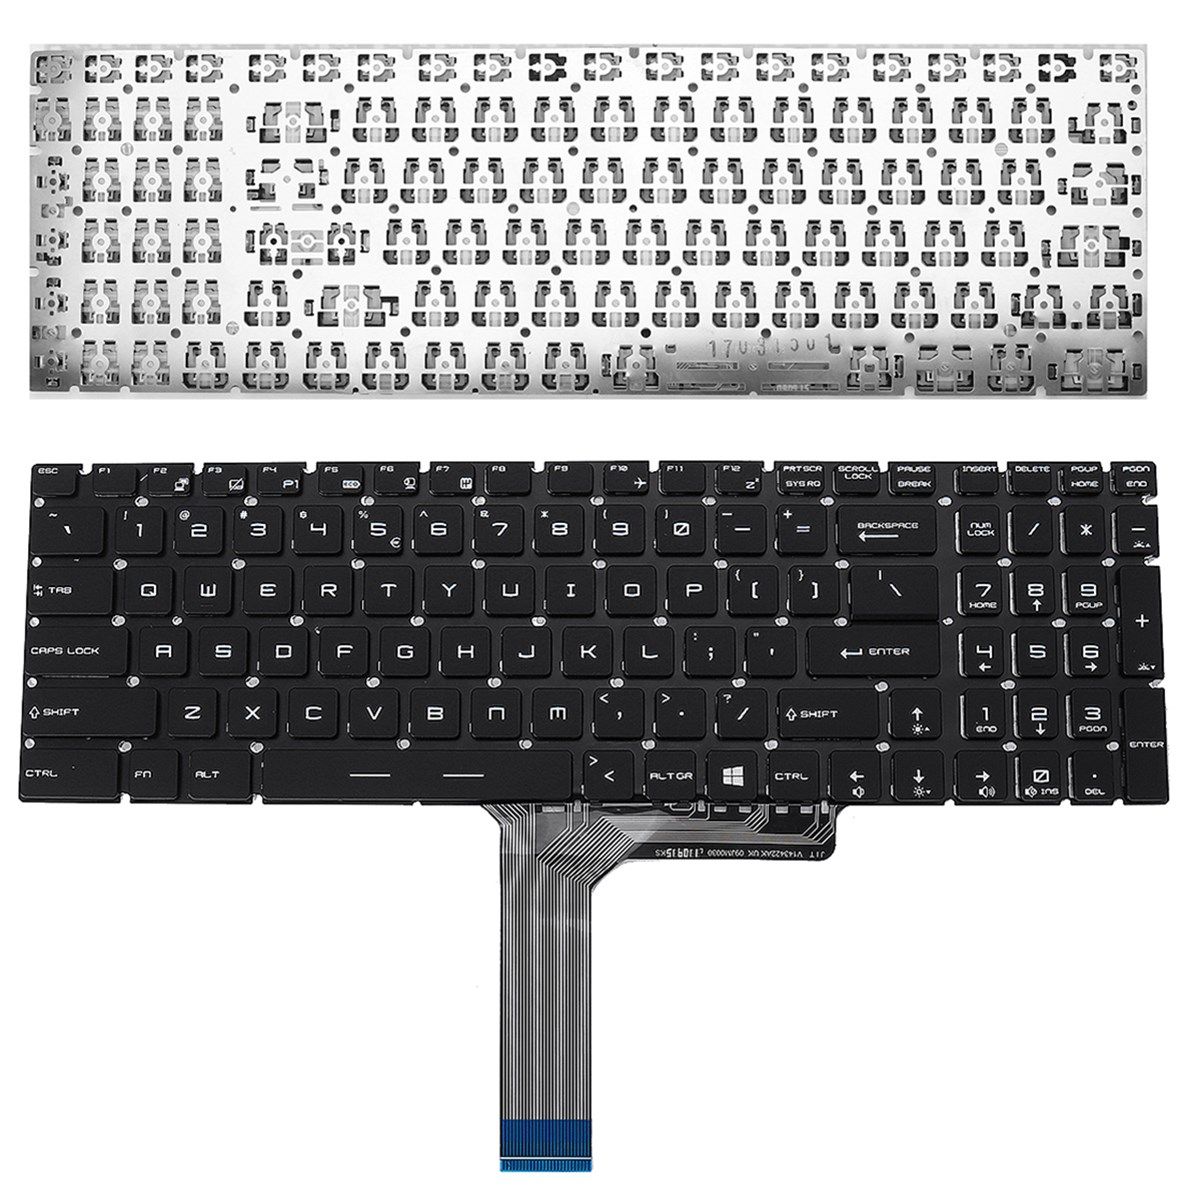 MSI-Steelseries-GL62-GL72-PC-Replacement-Gaming-Keyboard-US-No-Backlit-Frame-White-Print-1636103